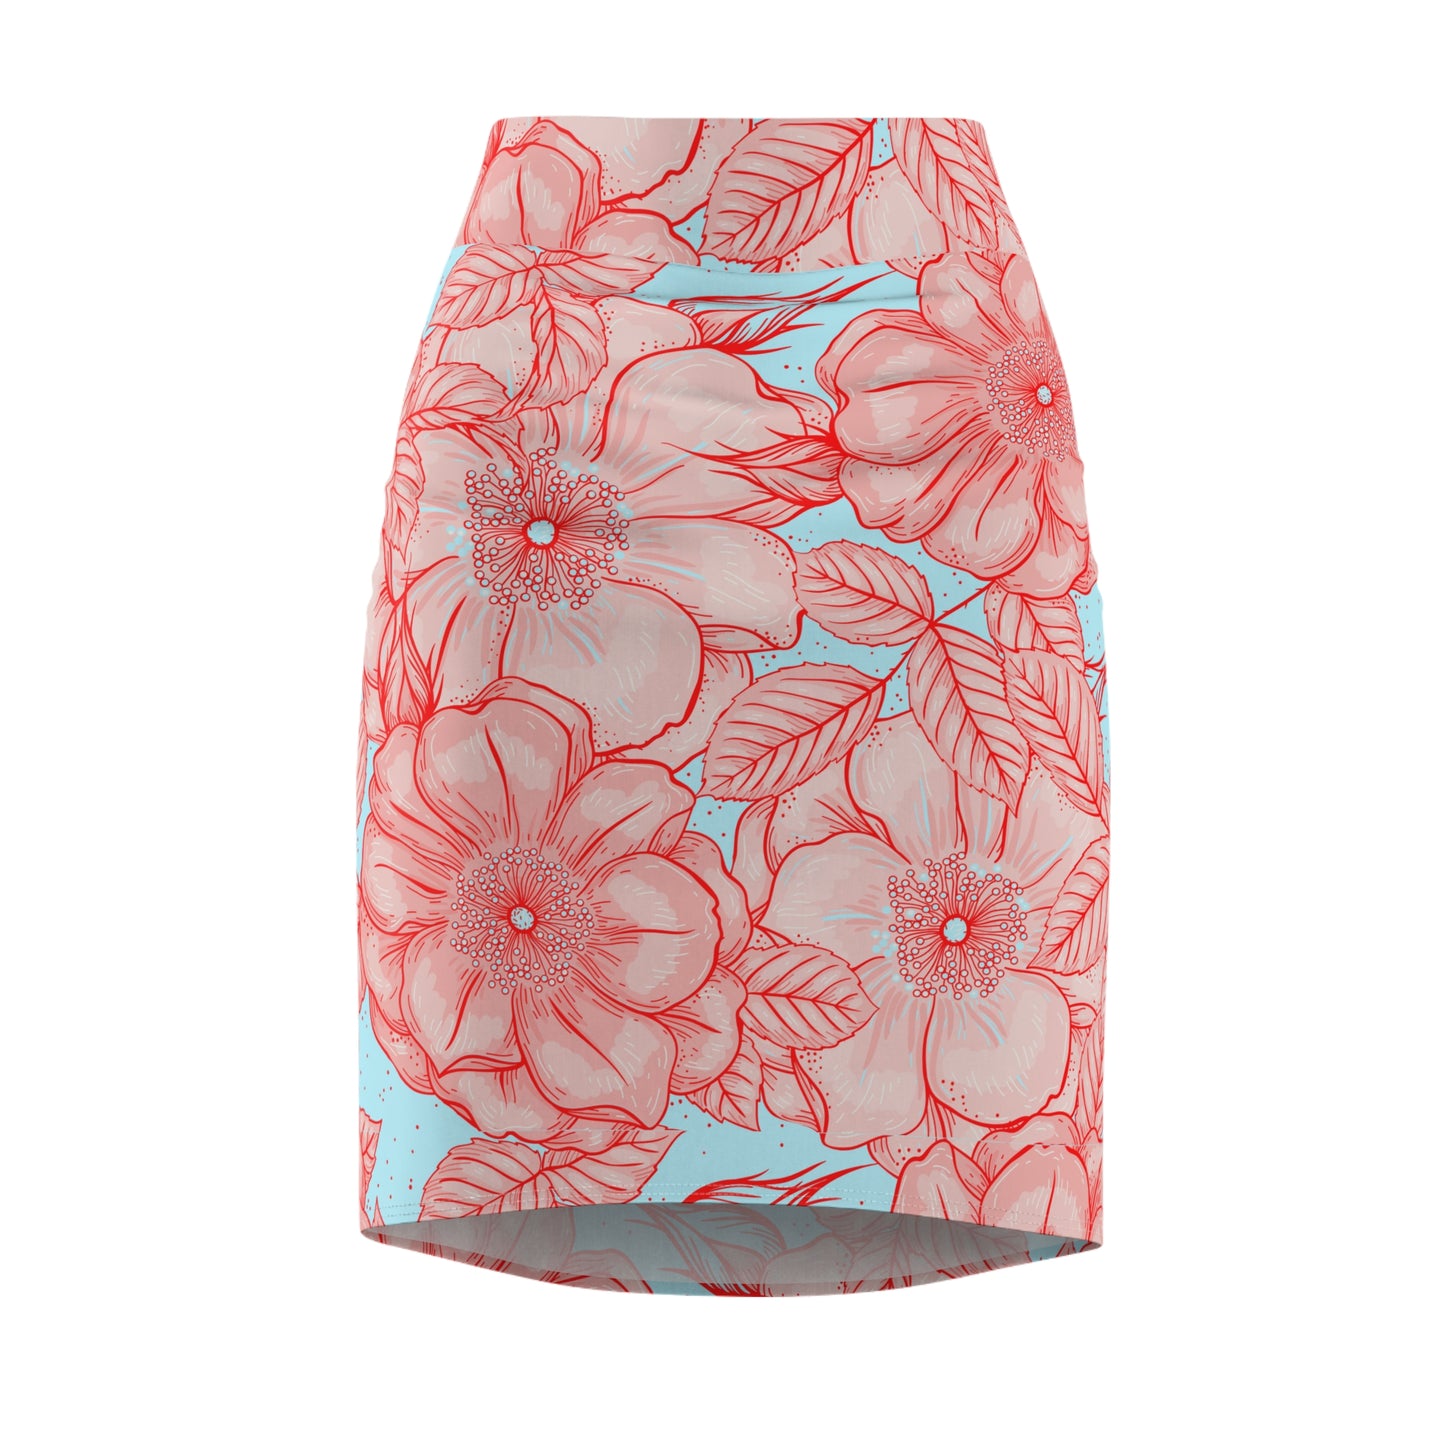 Sea and Bloom Pencil Skirt